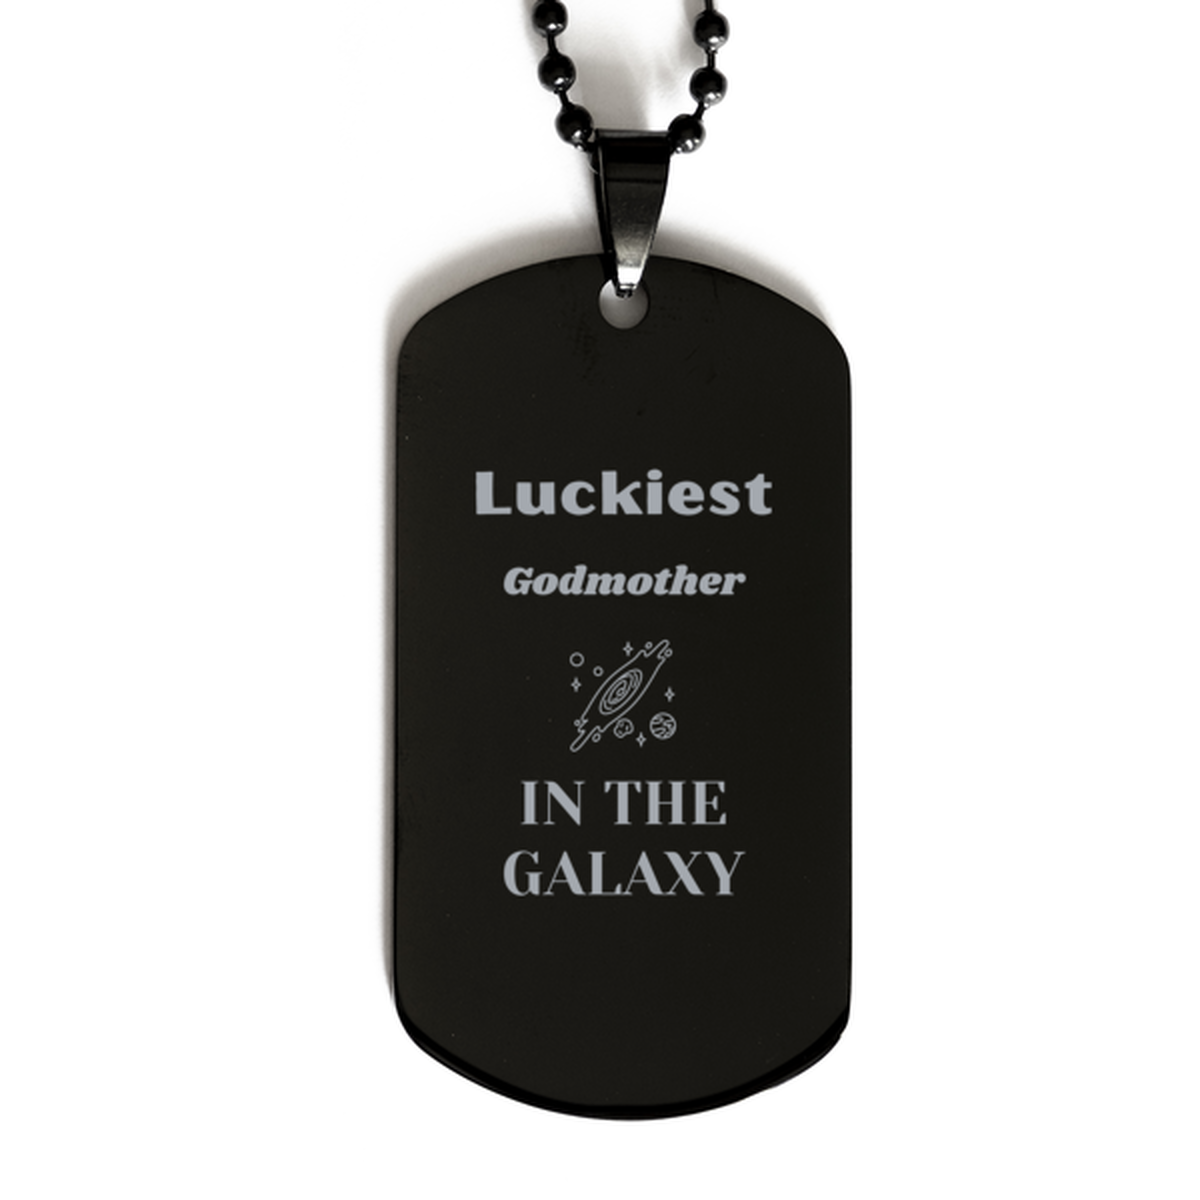 Luckiest Godmother in the Galaxy, To My Godmother Engraved Gifts, Christmas Godmother Black Dog Tag Gifts, X-mas Birthday Unique Gifts For Godmother Men Women